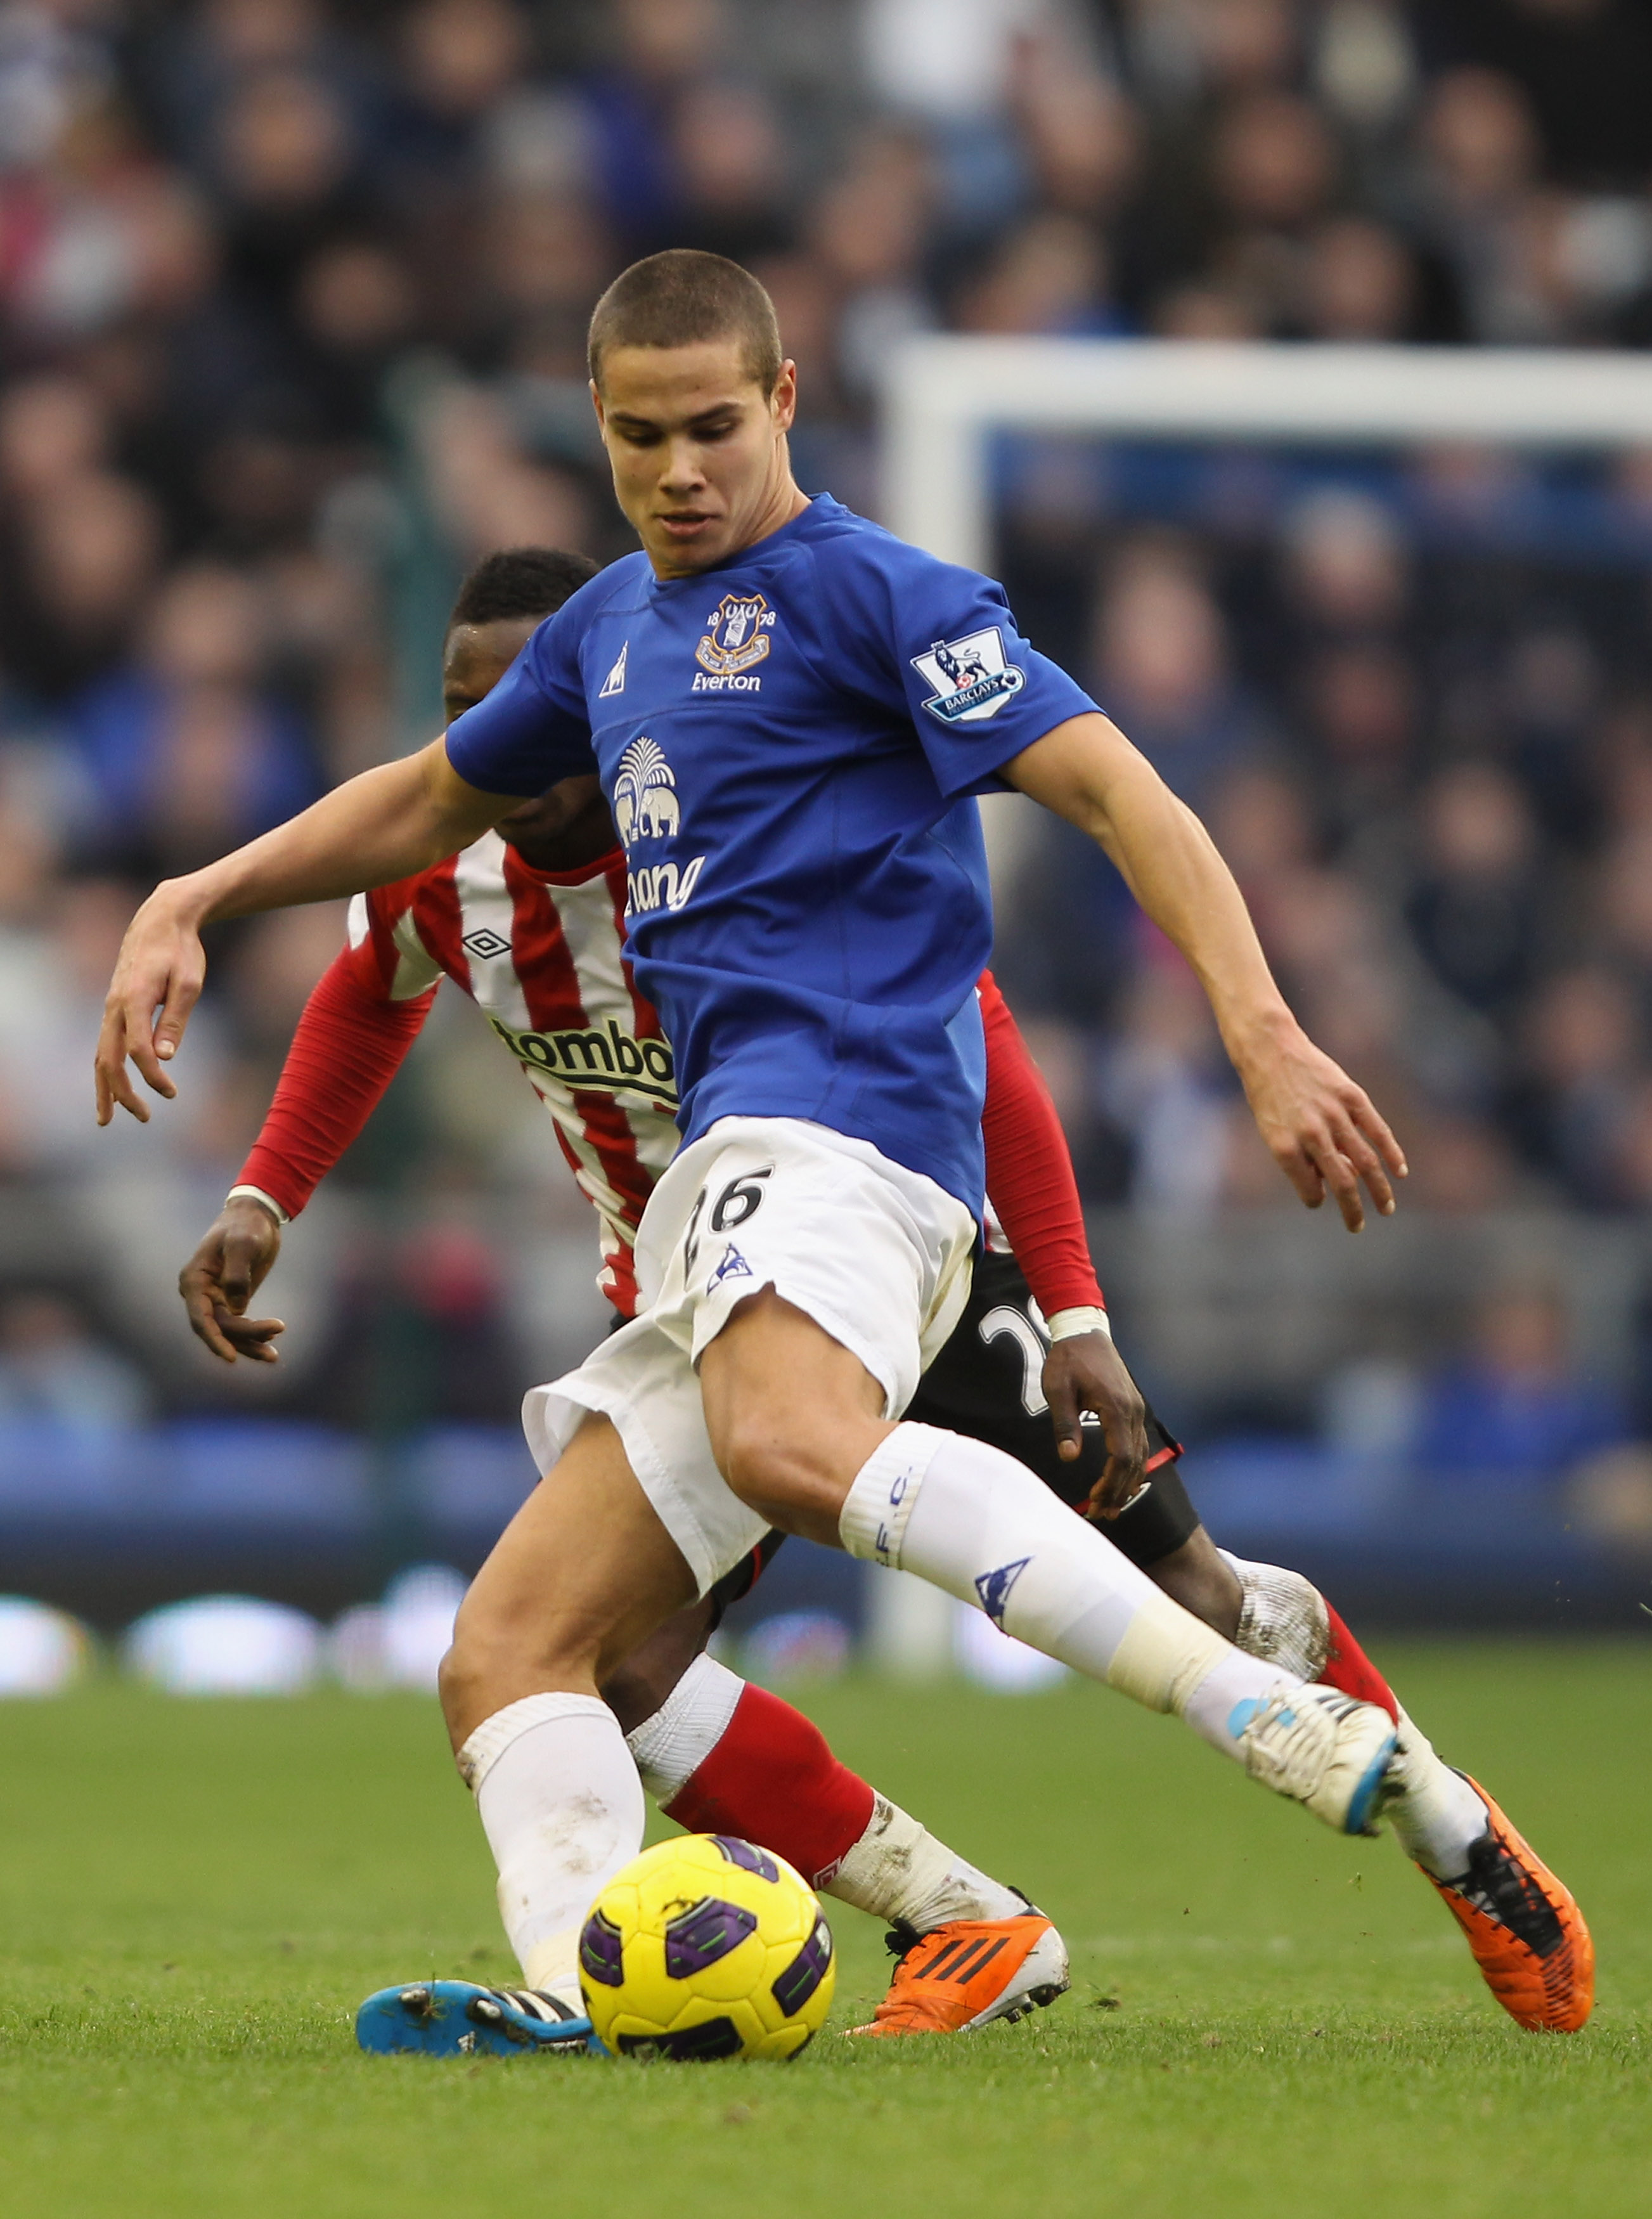 LIVERPOOL, ENGLAND - FEBRUARY 26:  Jack Rodwell of Everton shields the ball from Stephane Sessegnon of Sunderland during the Barclays Premier League match between Everton  and Sunderland at Goodison Park on February 26, 2011 in Liverpool, England.  (Photo